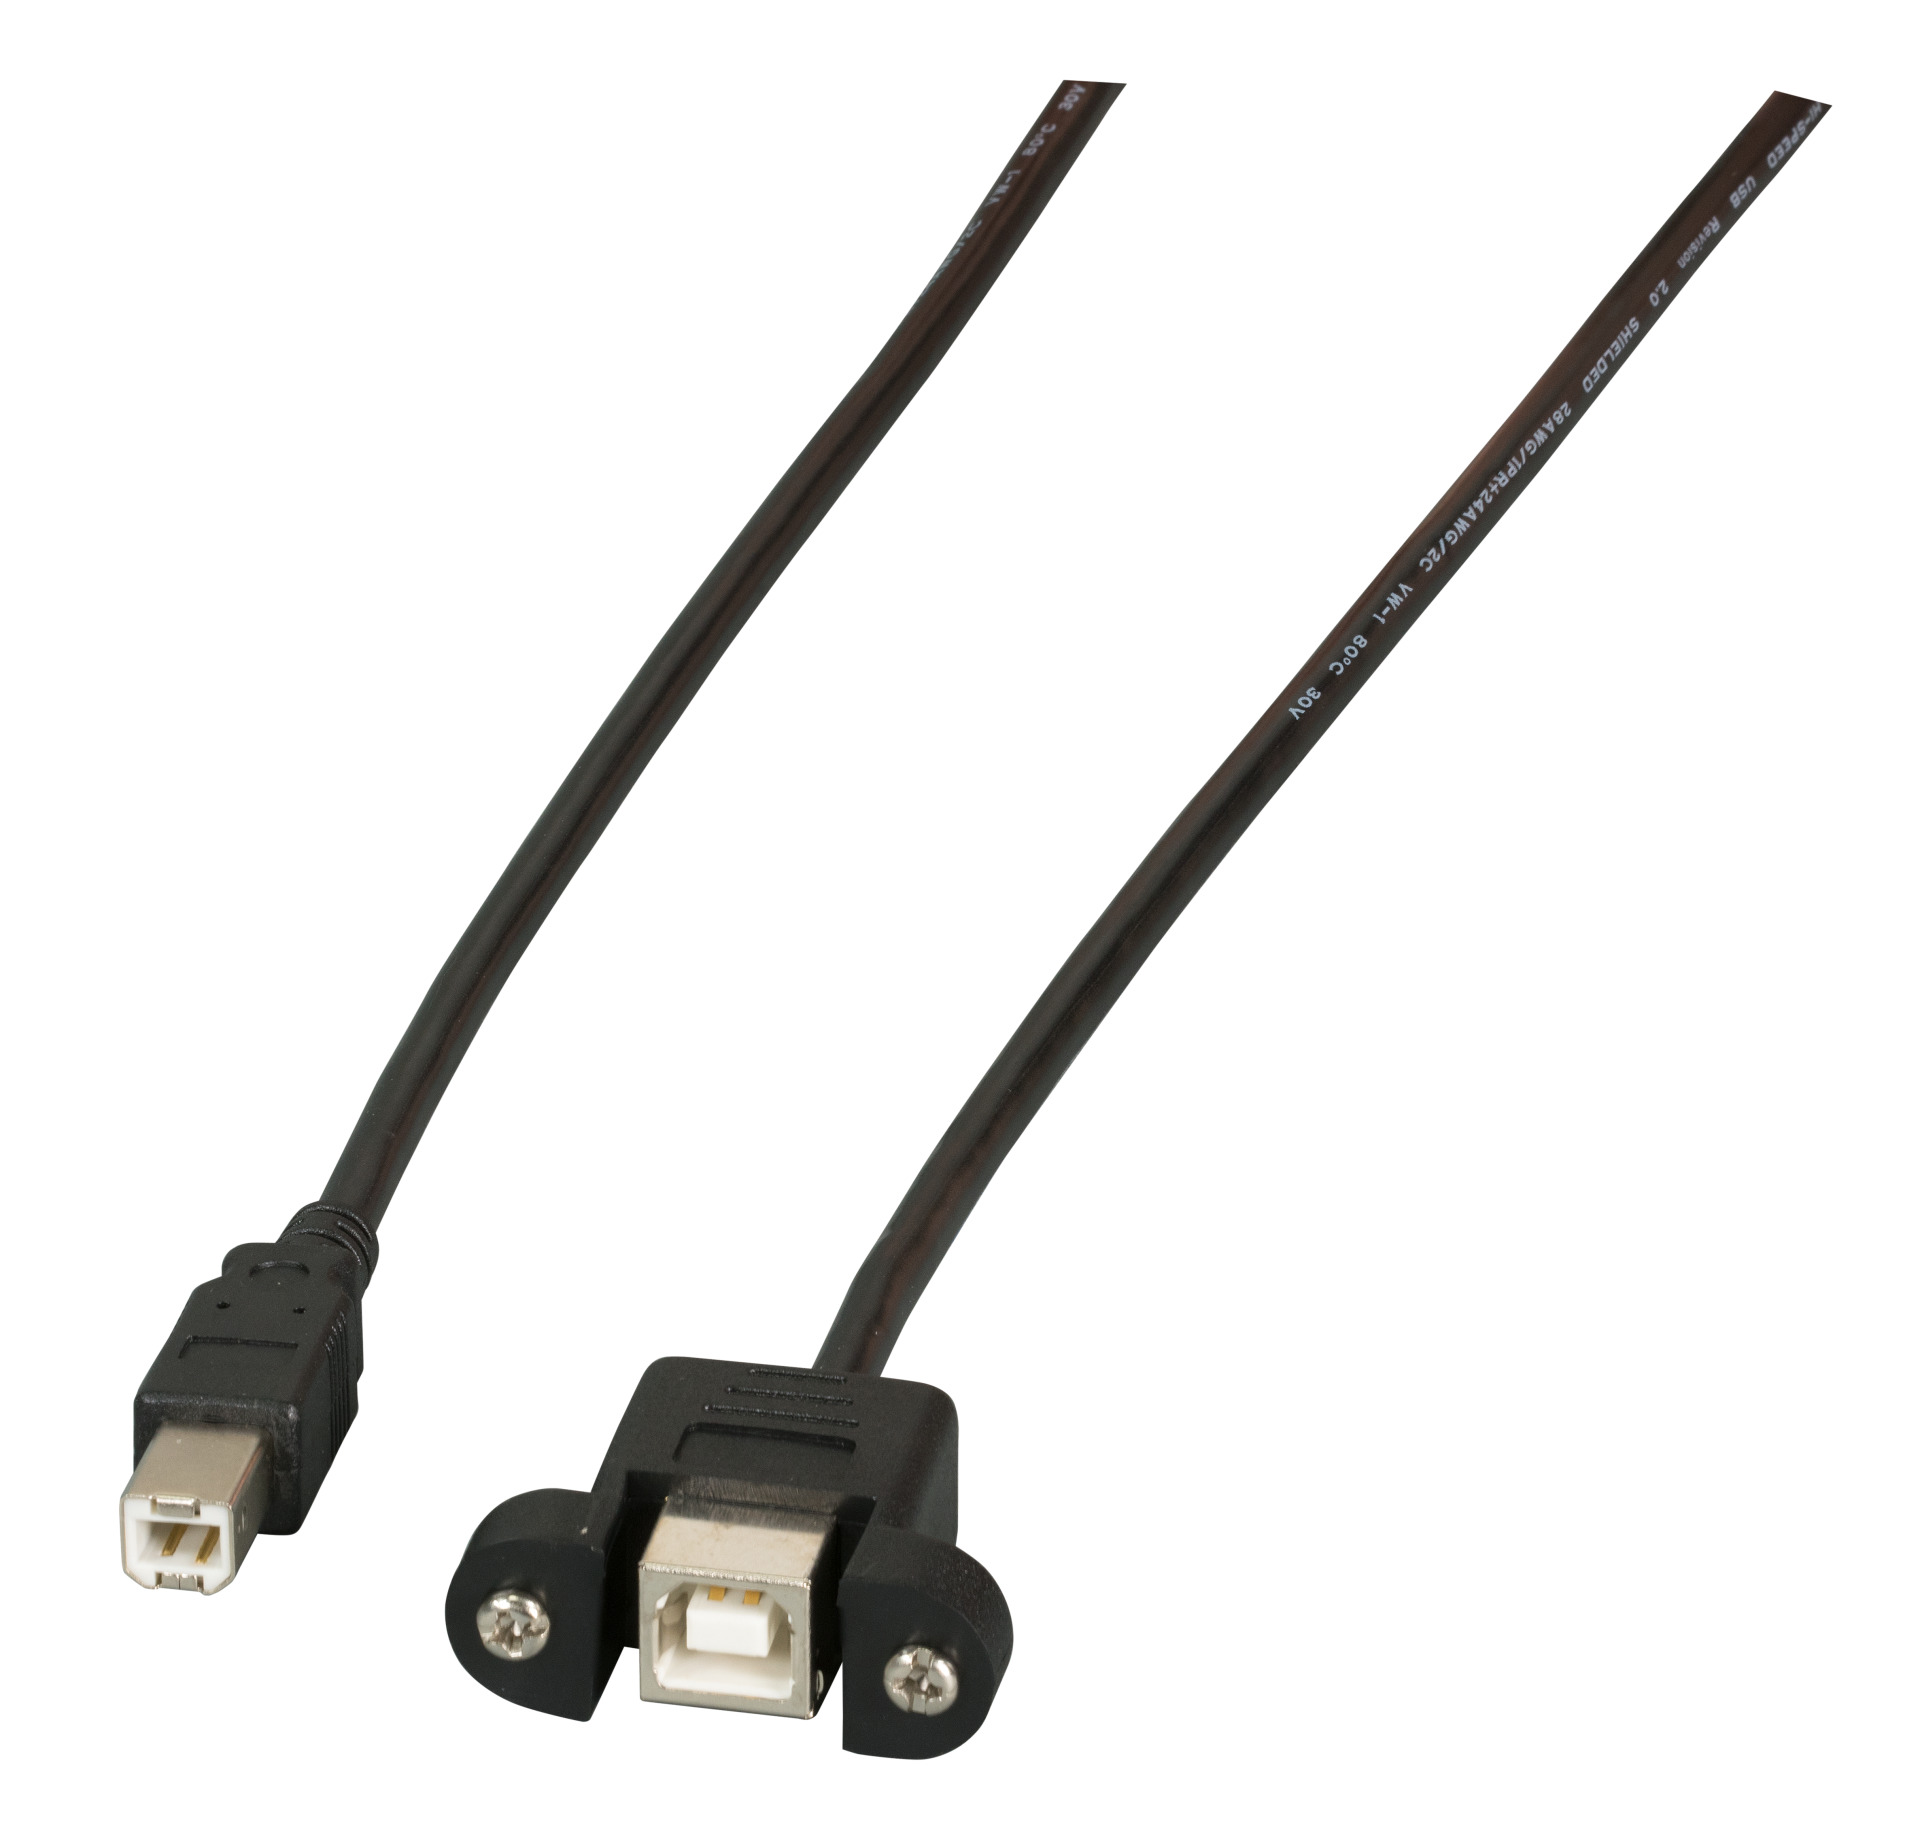 Purchase USB products online from the expert